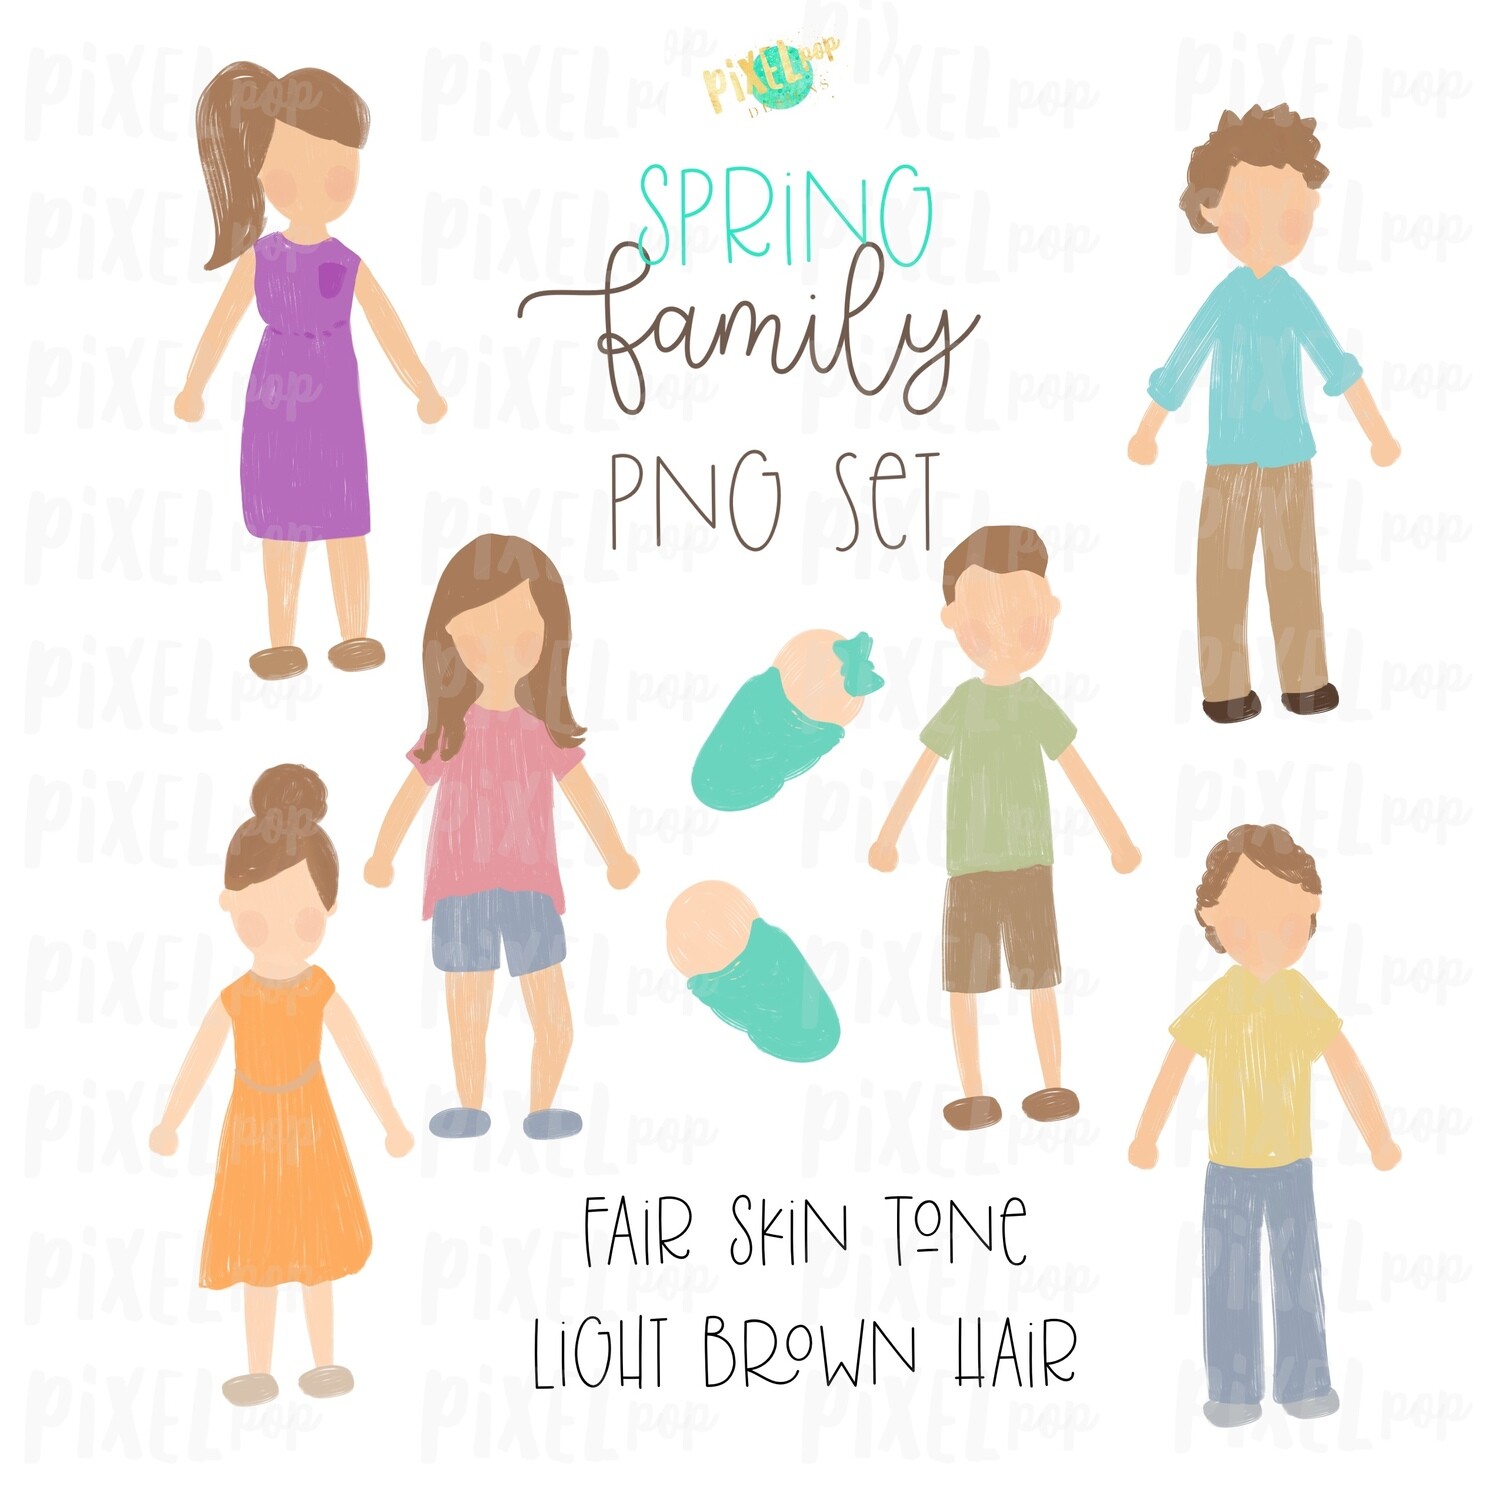 SPRING Fair Skin Light Brown Hair Stick People Figure Family PNG Sublimation | Family Ornament | Family Portrait Images | Digital Download